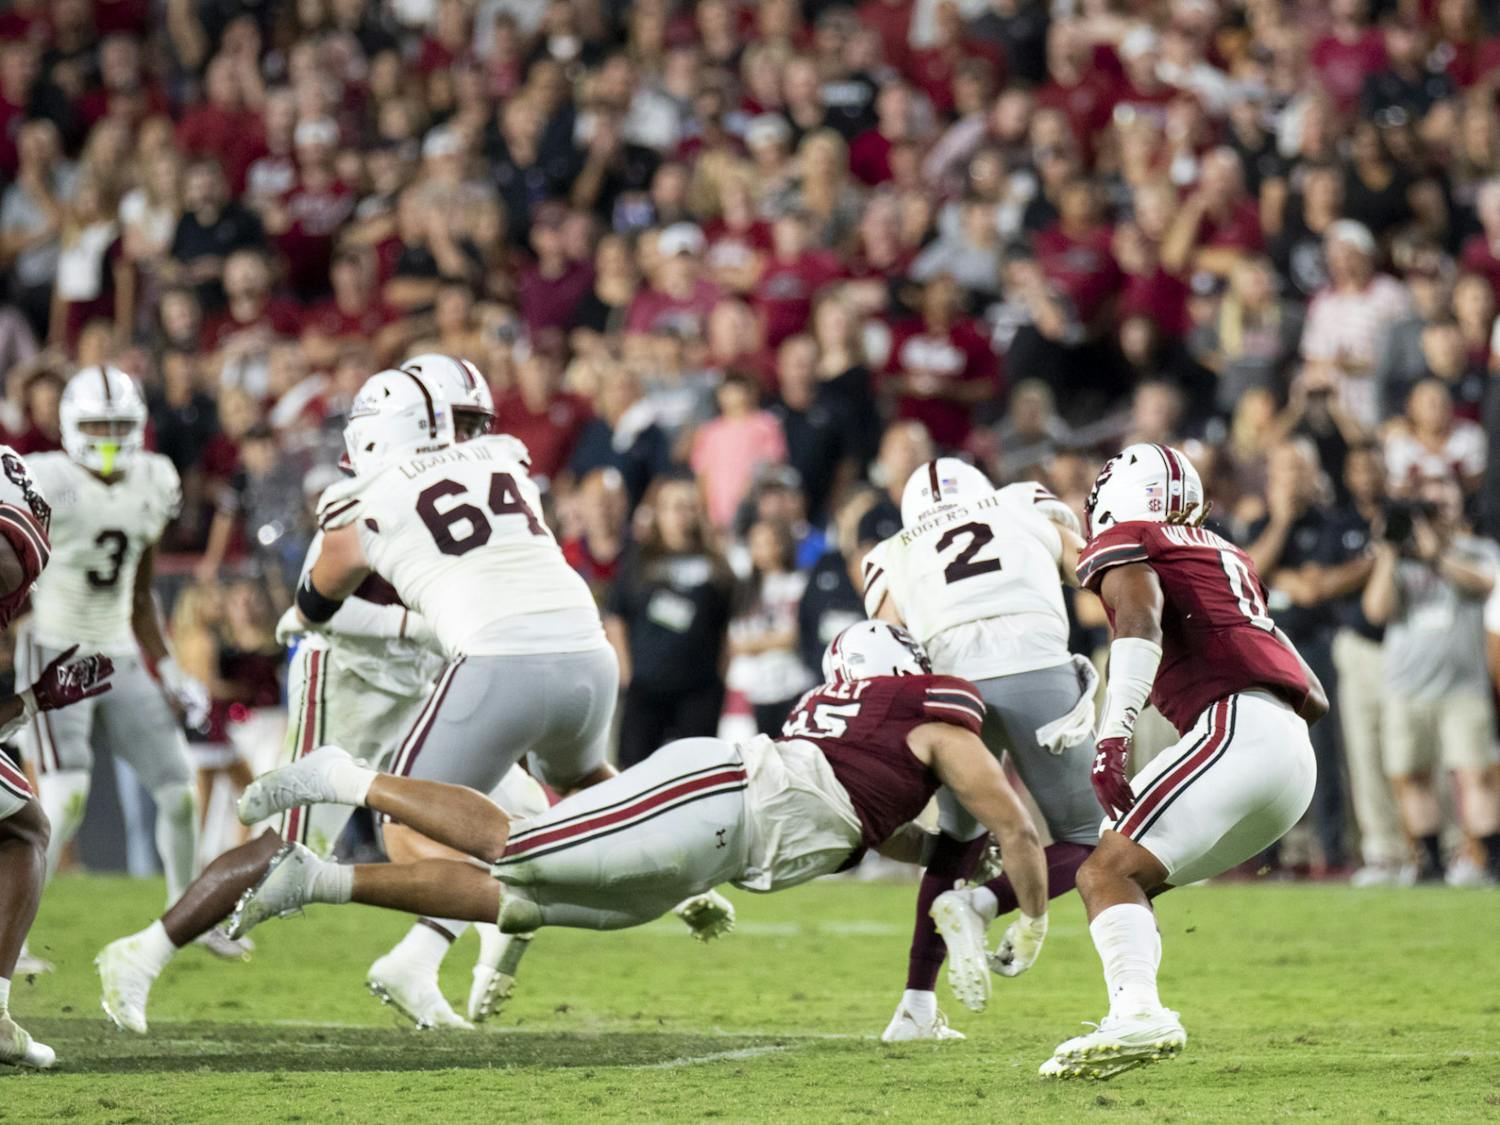 Redshirt junior defensive tackle Alex Huntley completes a sack on Mississippi State's quarterback at Williams-Brice Stadium on Sept. 23, 2023. Huntley was named one of the Gamecocks' captains for the match.